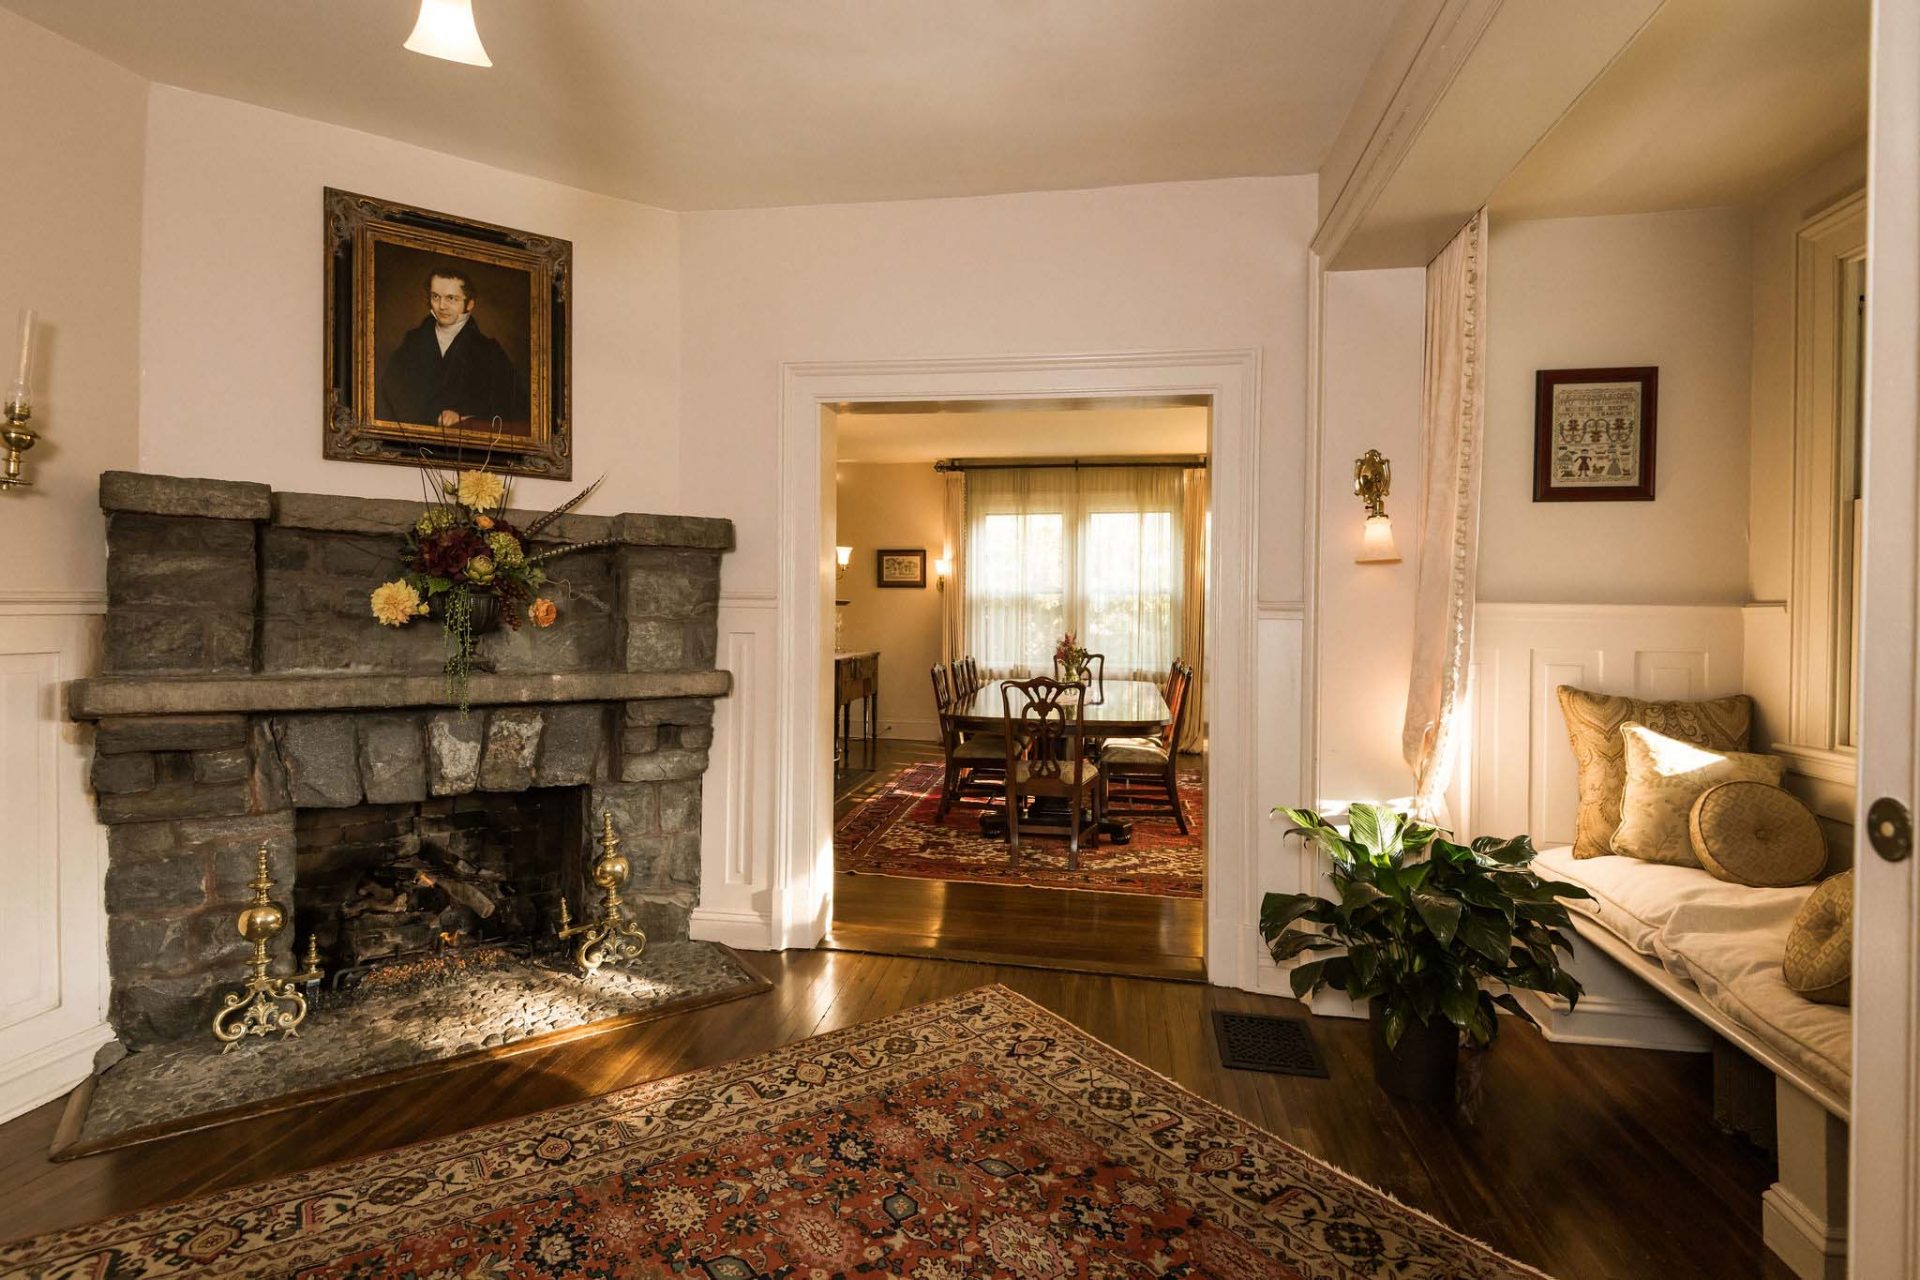 The Inn's foyer with a nook to the right, followed by the entrance to the dining area, and with a big stone fireplace and a portrait hanging above it.